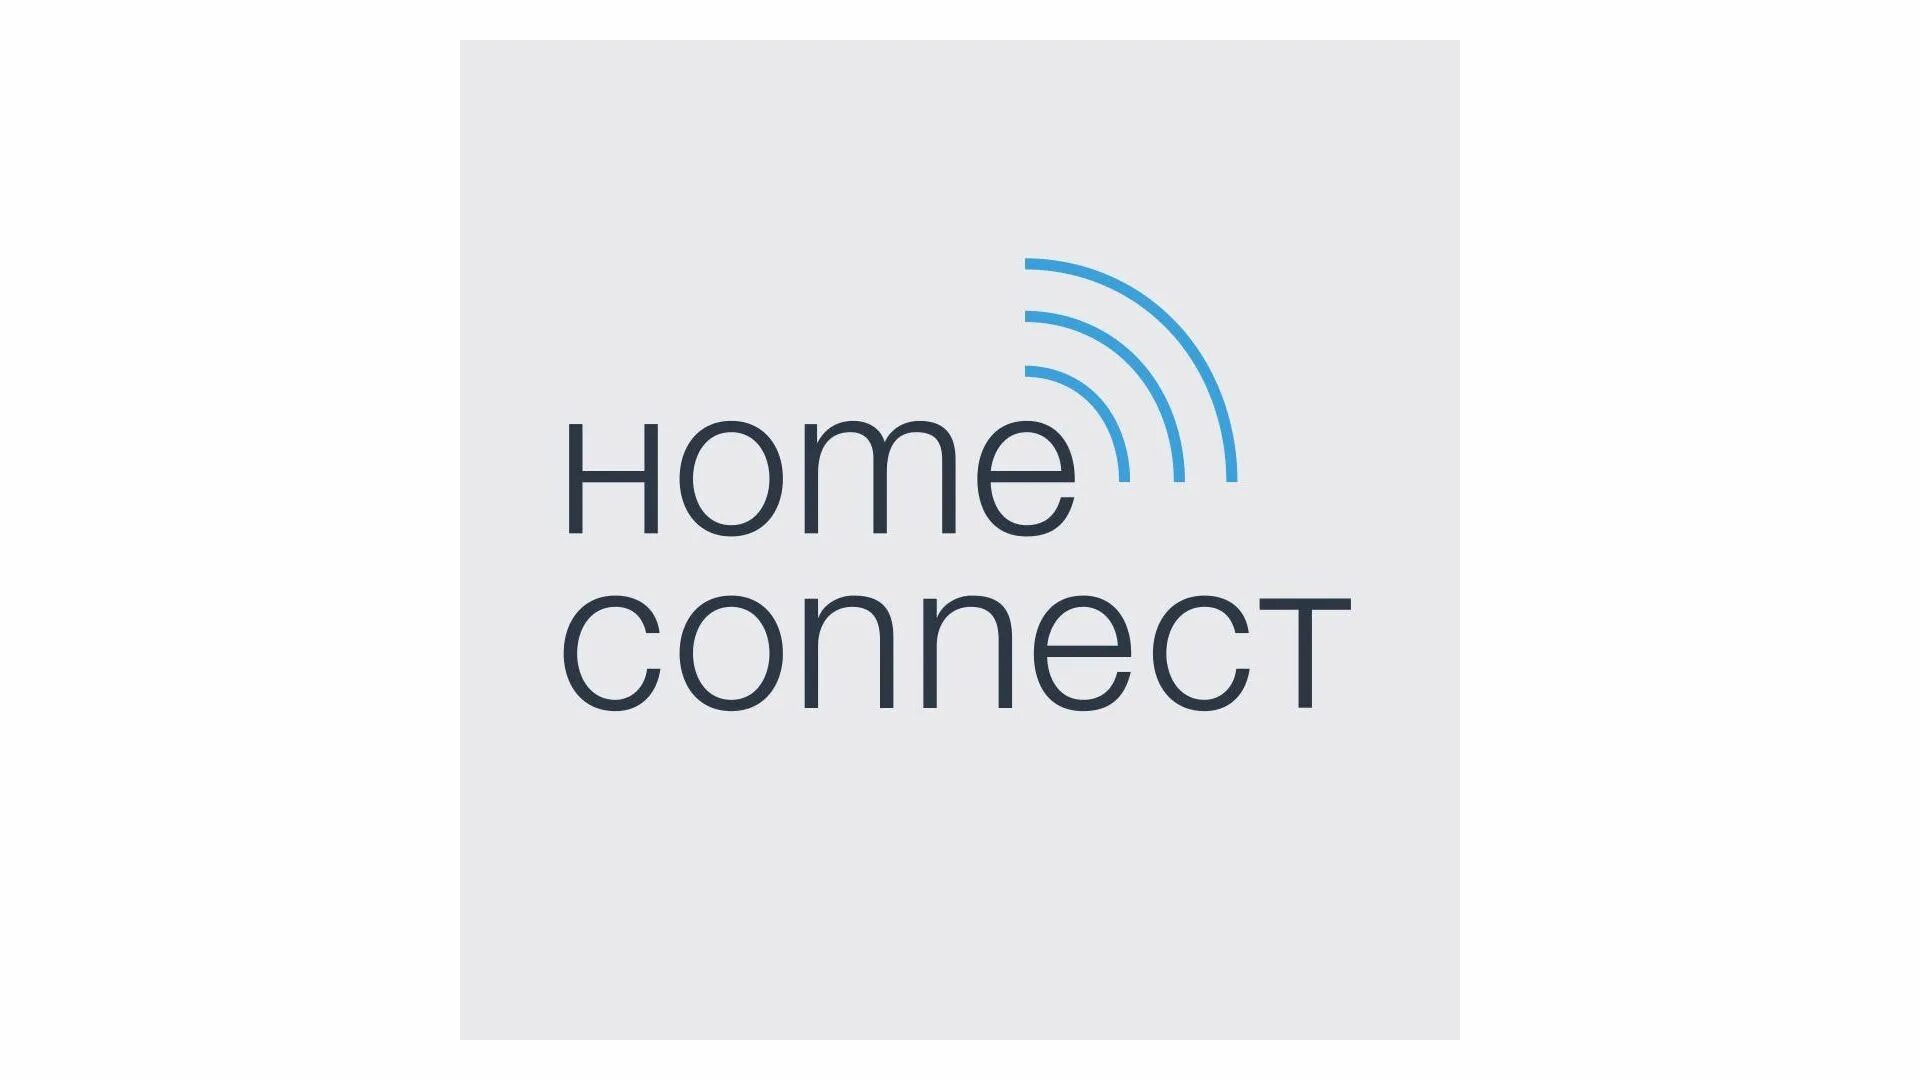 Home connections. Home connect. Приложение Home connect. Home connect логотип. Приложение Bosch Home connect.